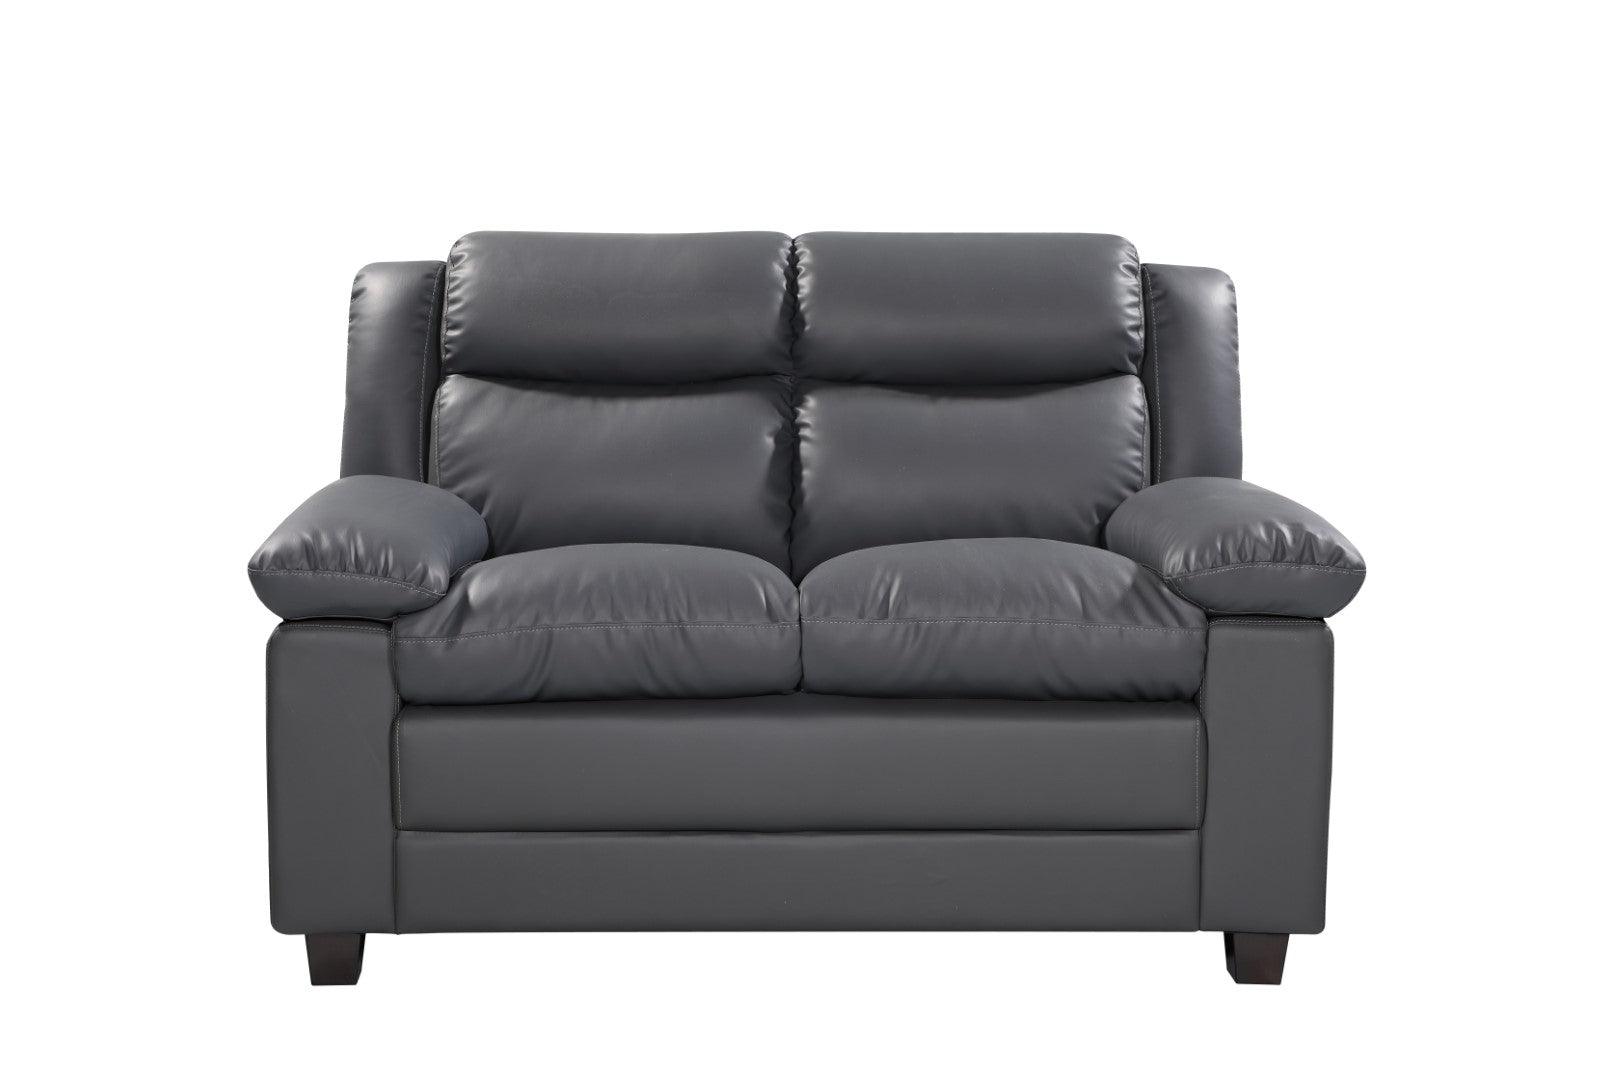 Jorja Leather Sofa Collection - loveyourbed.co.uk